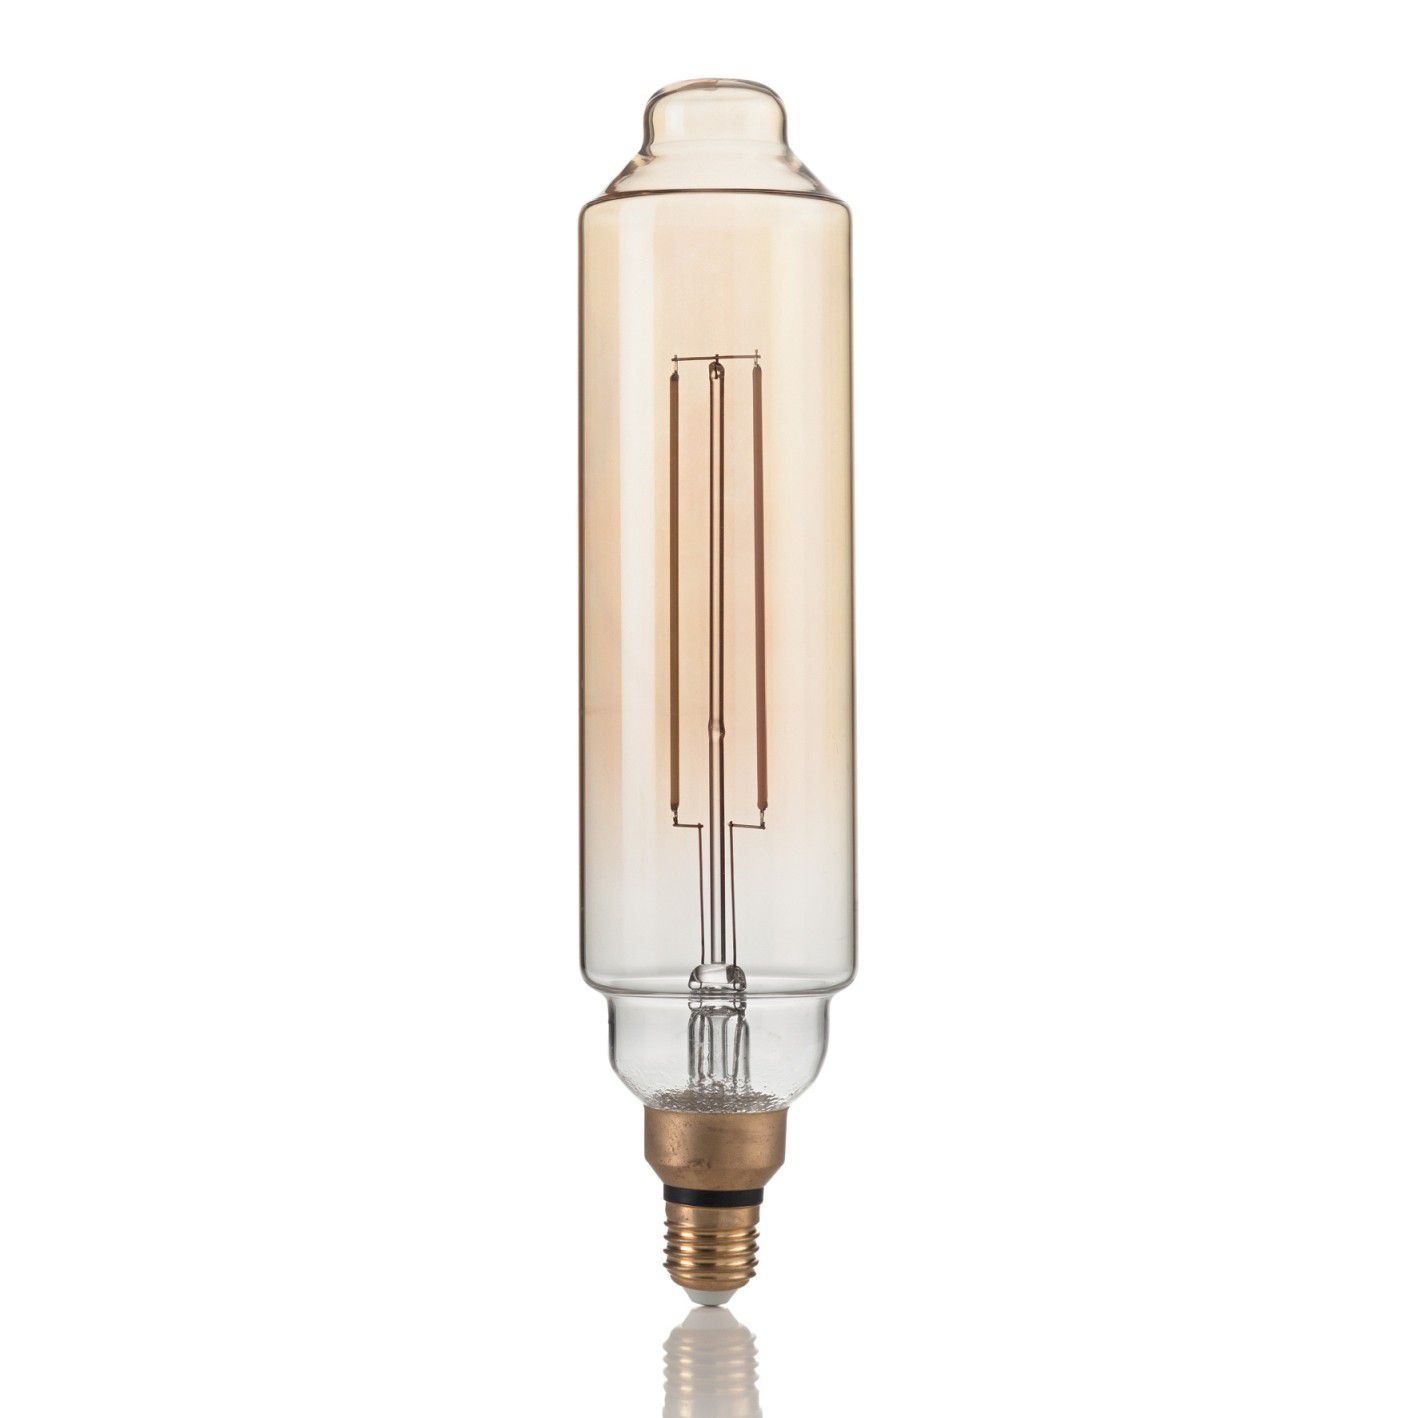 Ideal Lux Armony 145112 - A-LIGHT s.r.o.